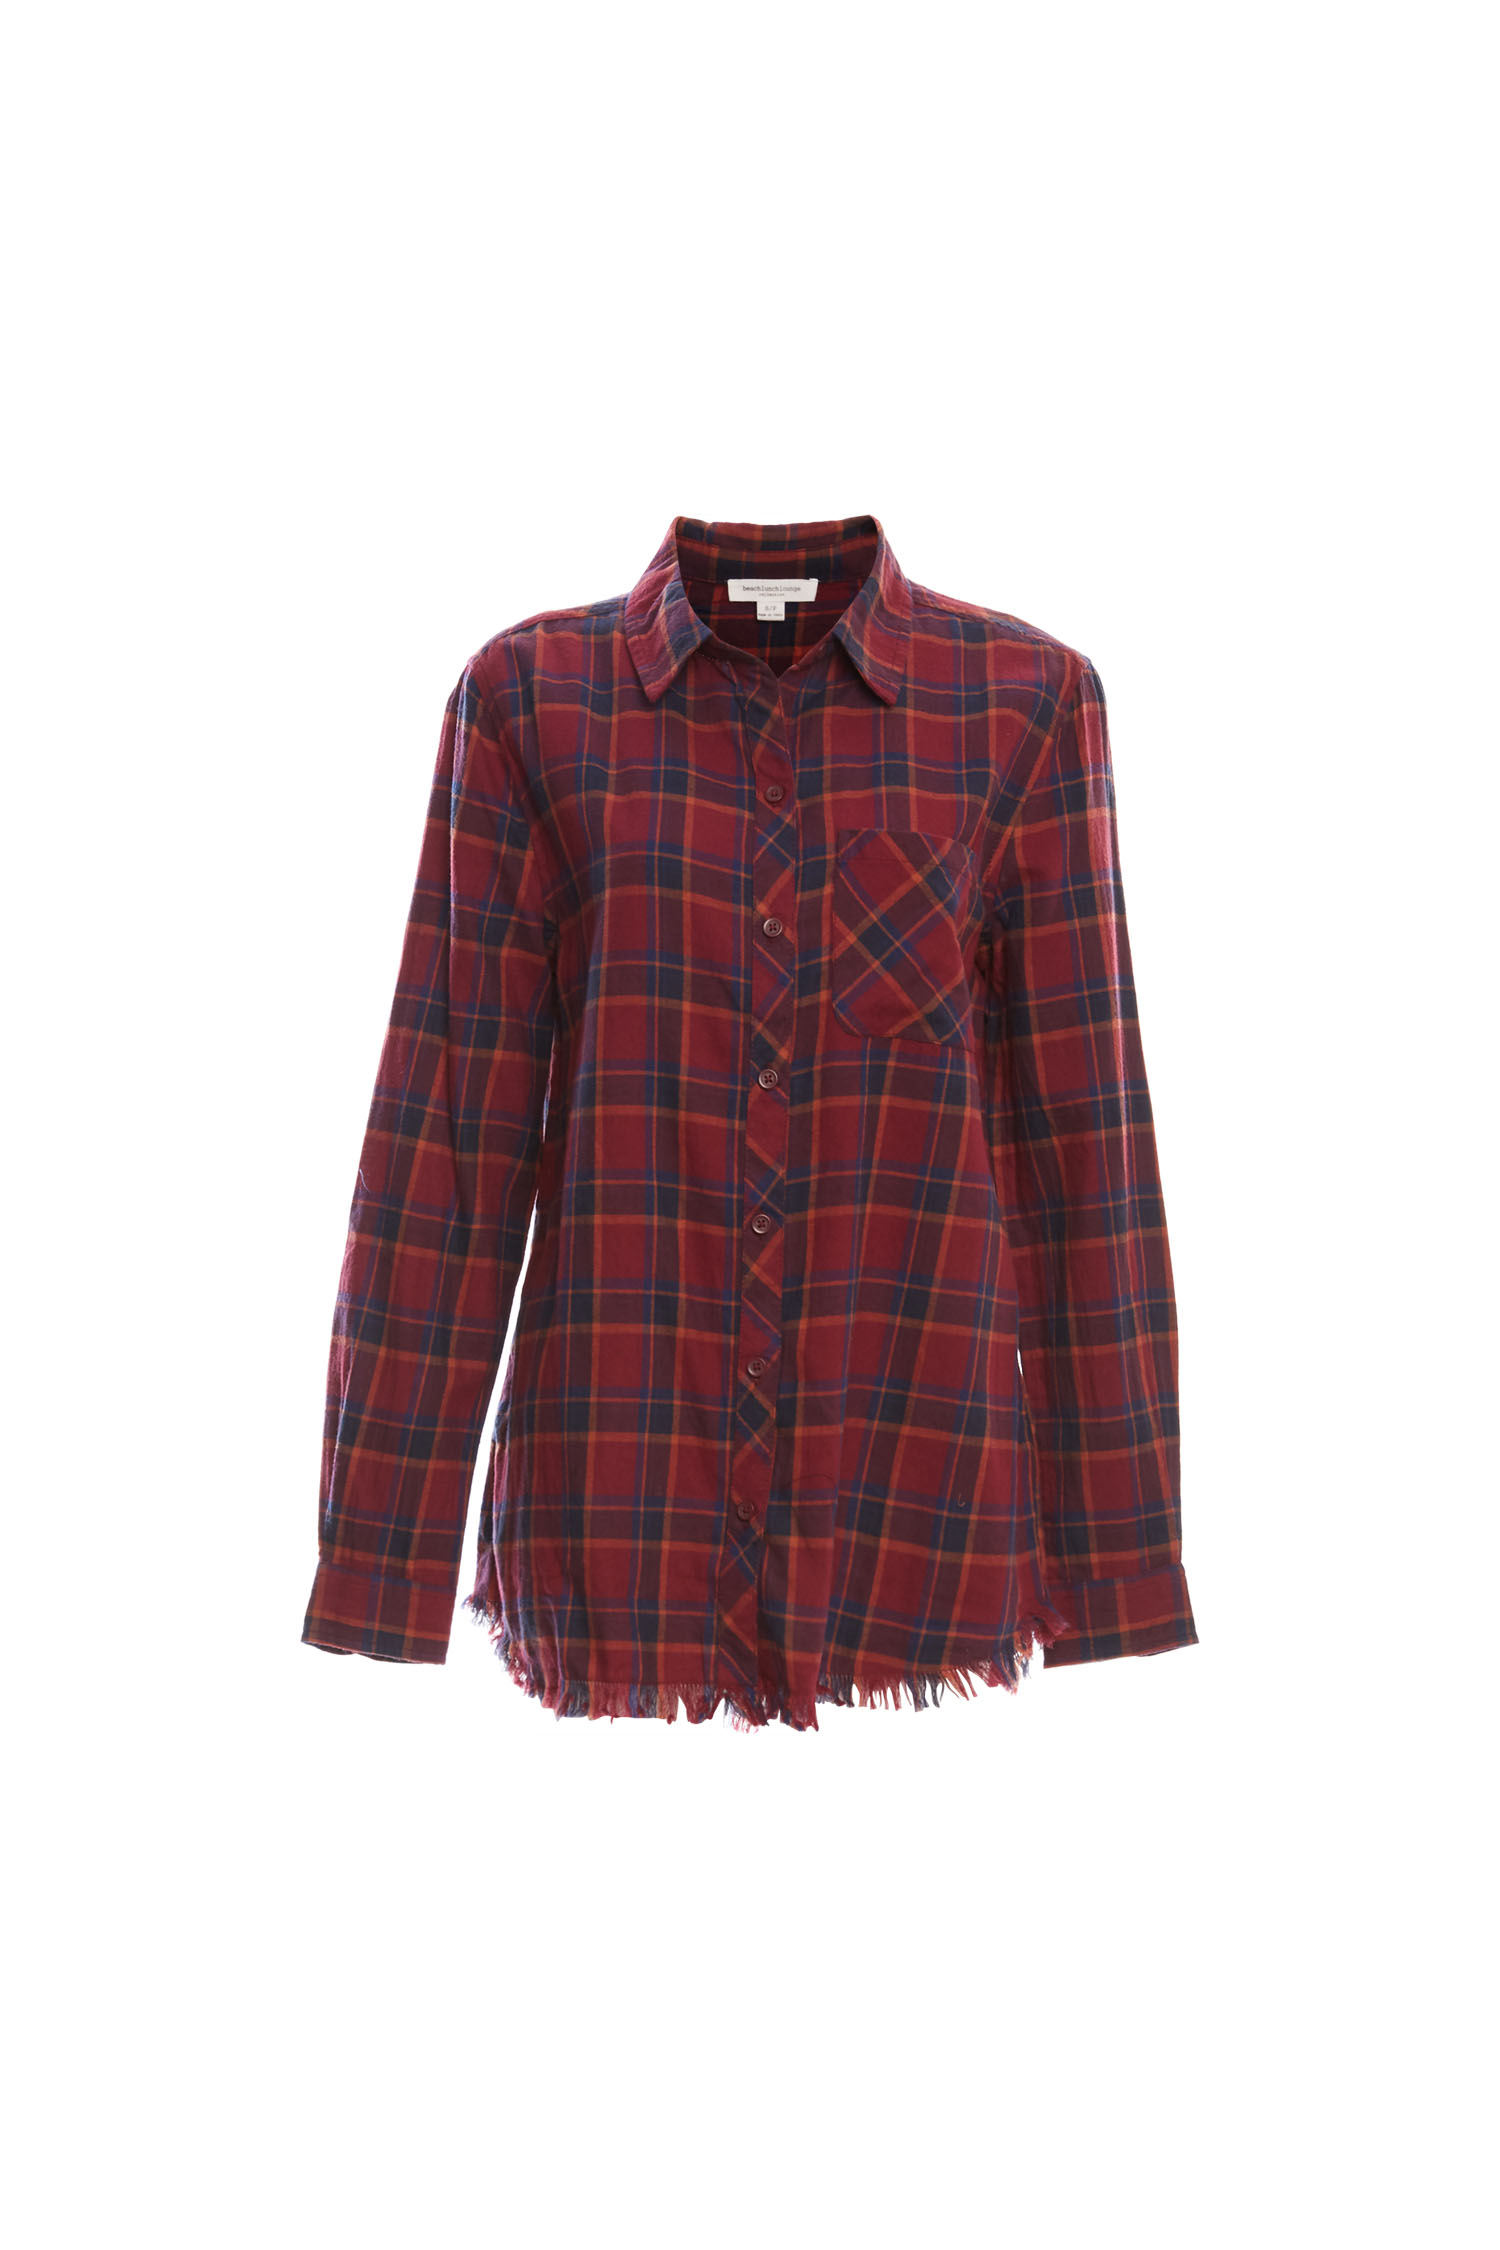 Beach Lunch Lounge Elyse Flannel Plaid in Wine XS | DAILYLOOK